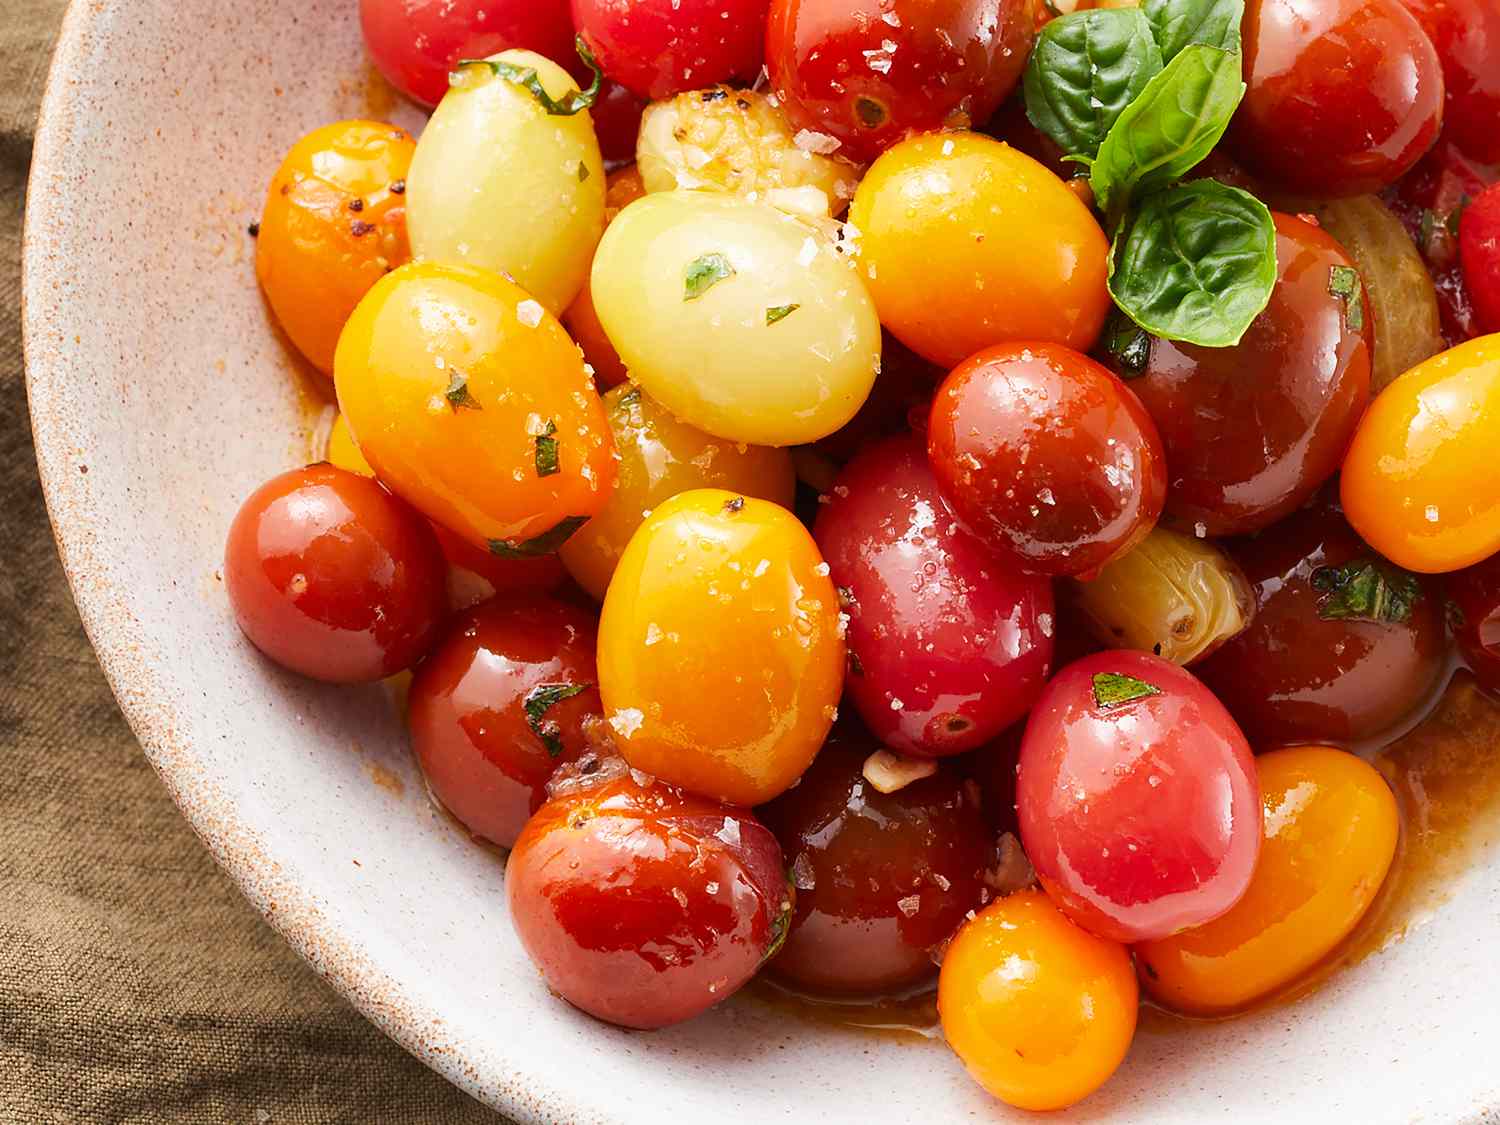 Tomatoes with basil